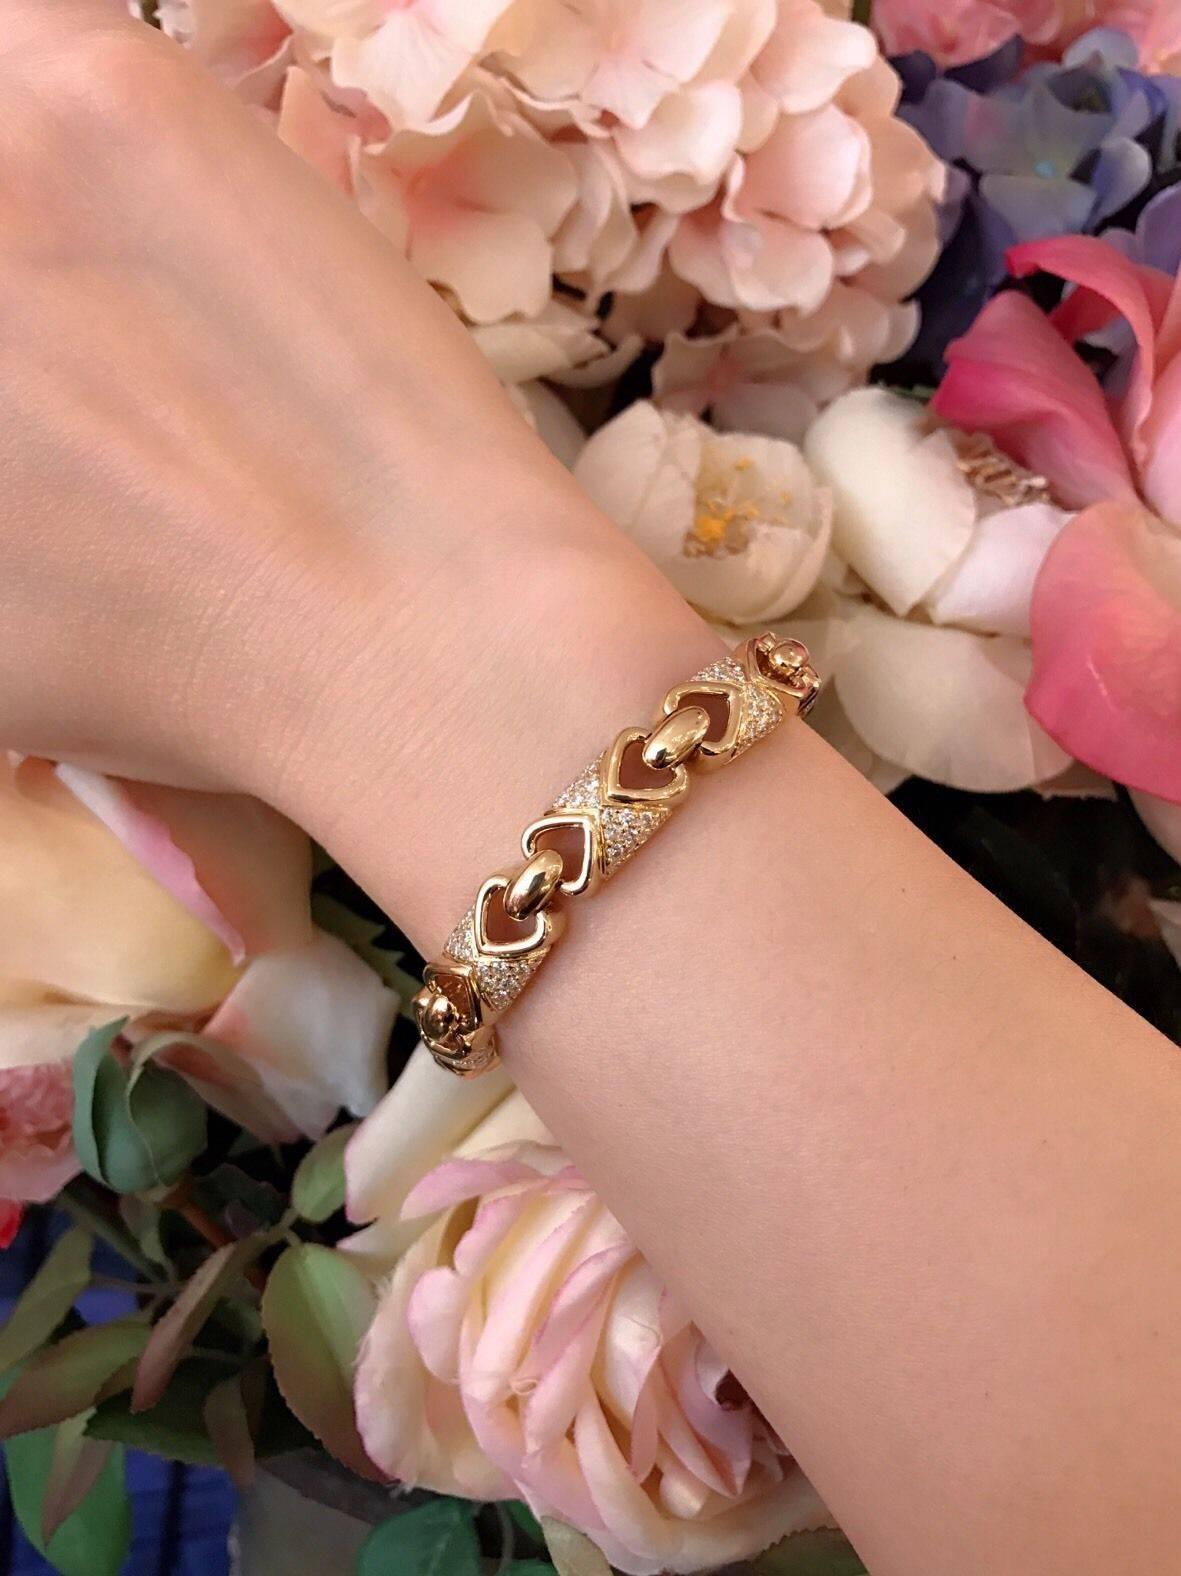 Bracelet features 4.45 cts of round brilliant cut pave-set diamonds. Diamond quality is averaging G color and VS clarity.  Flexible link bracelet made in high polished 18K yellow gold.  Hallmarks: H 750 4.45.  Bracelet weighs 33.0 grams 